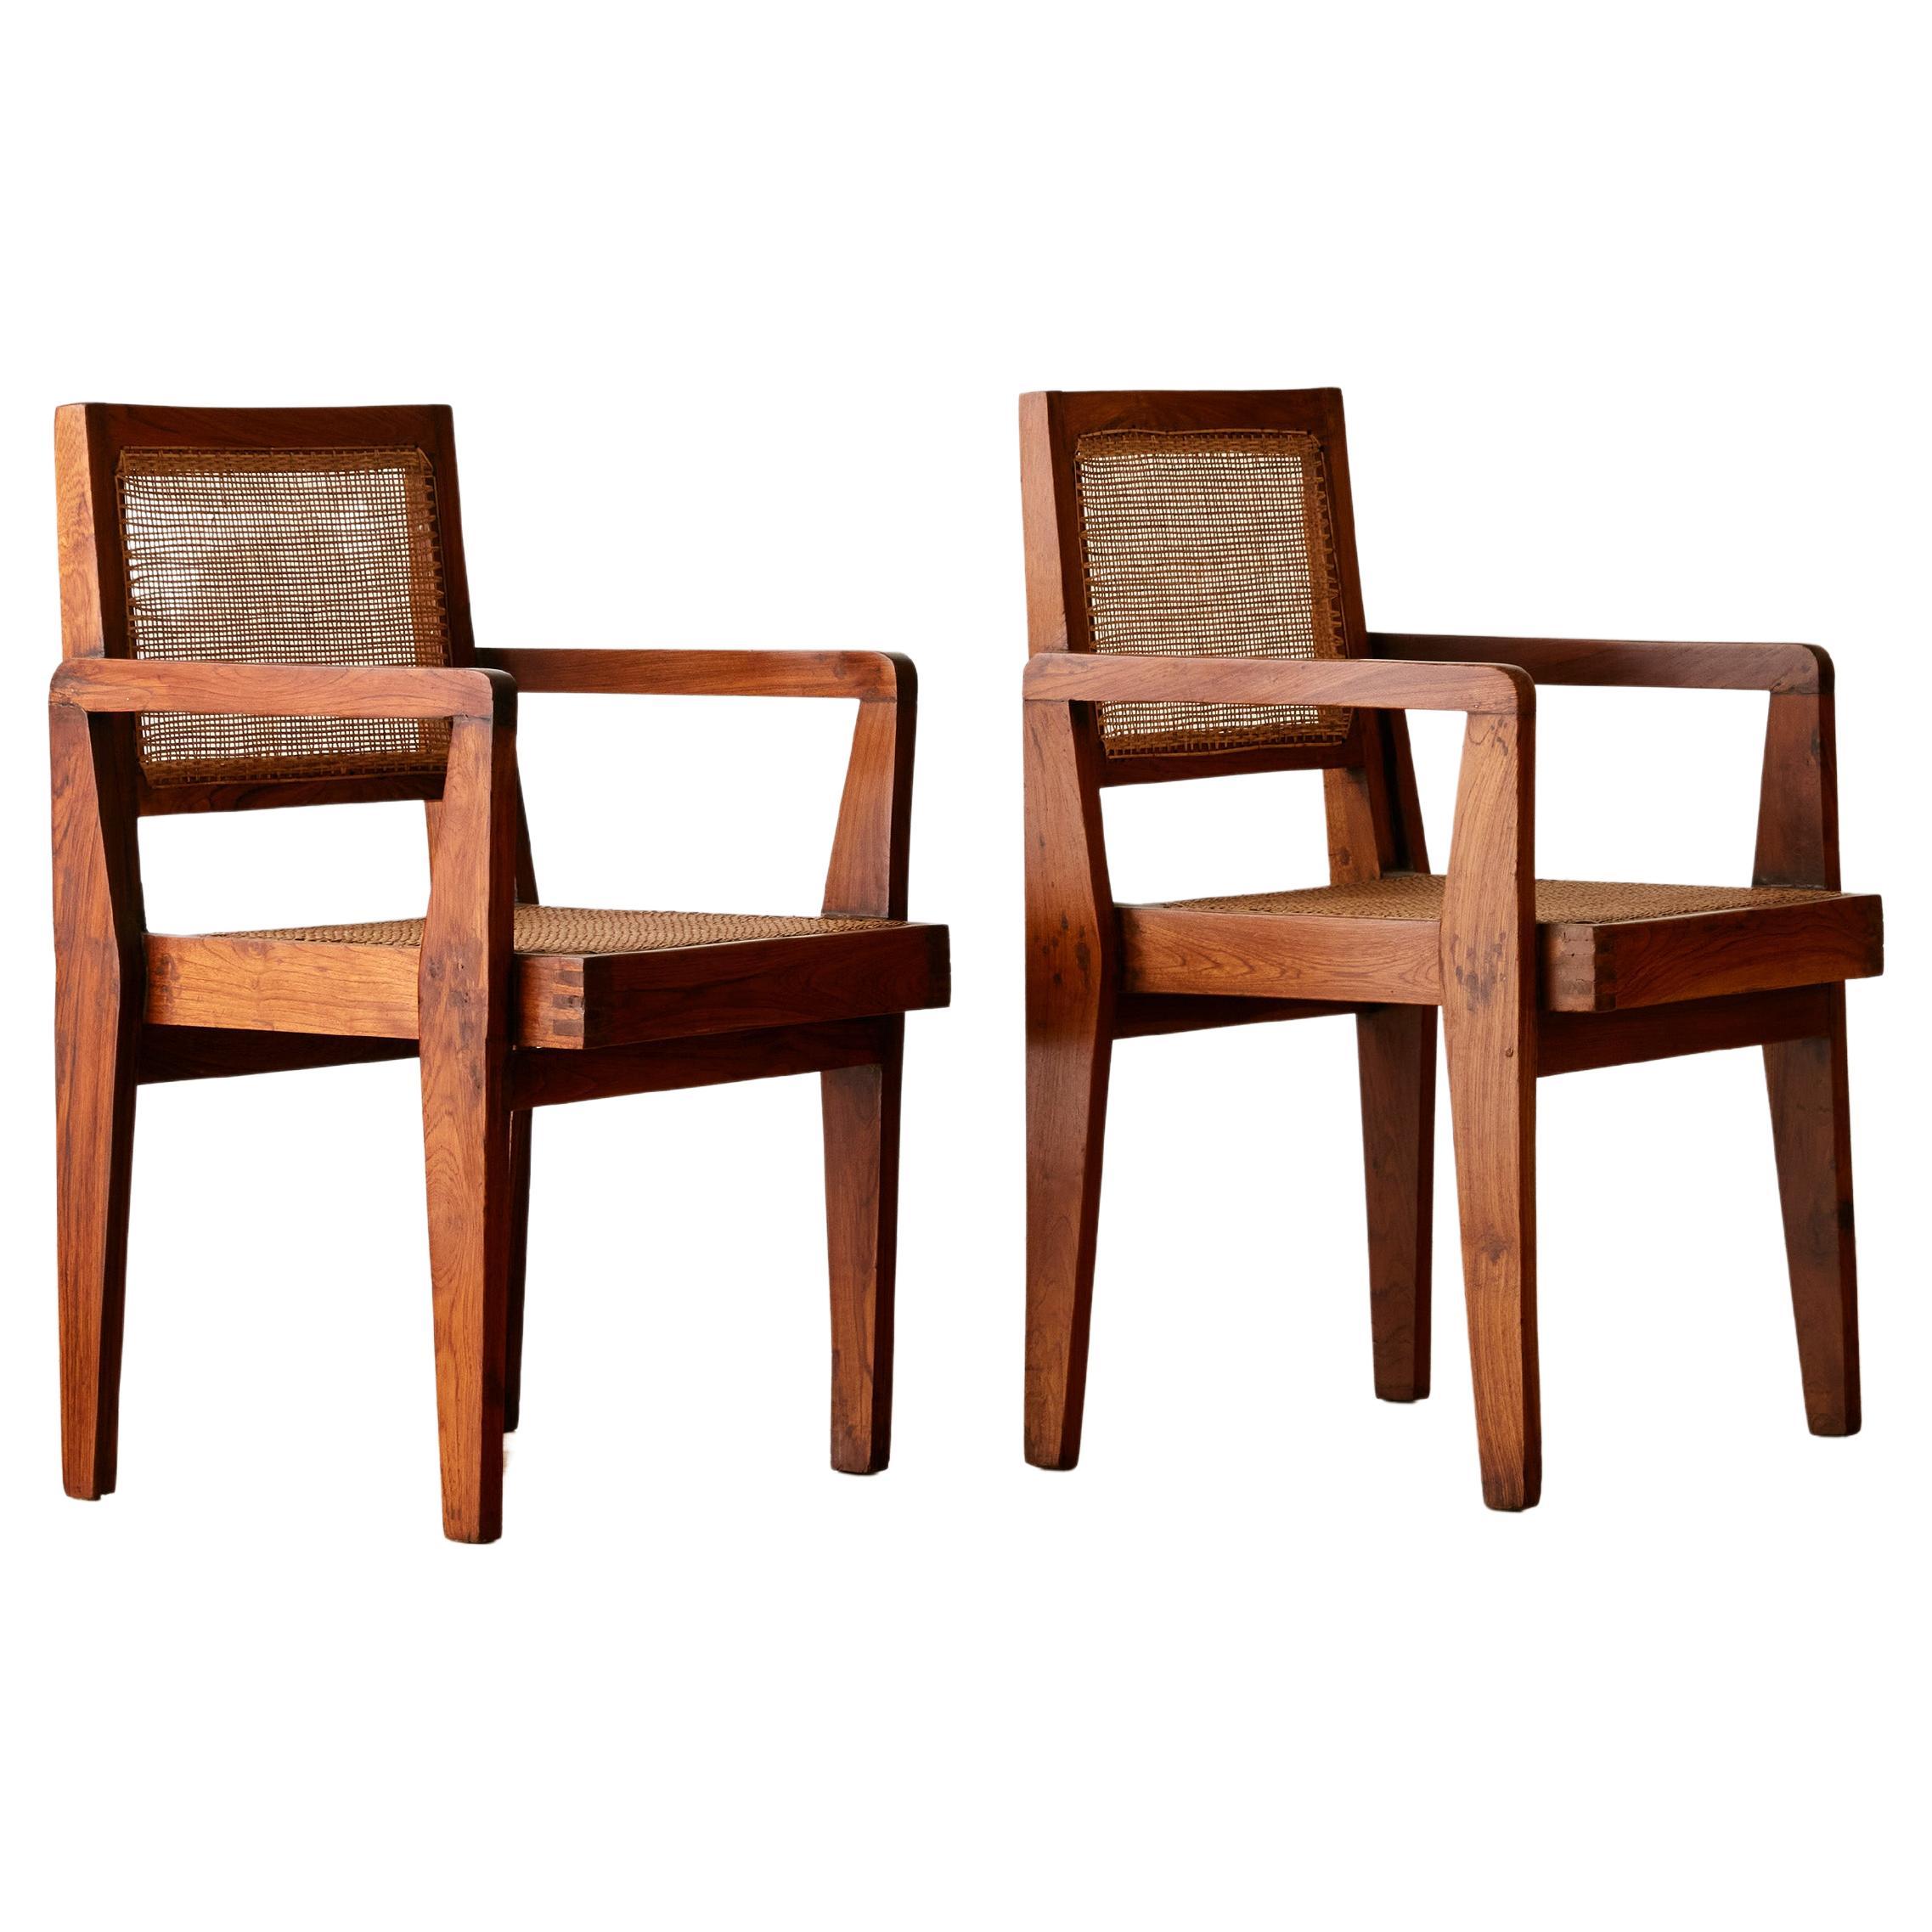 Are Pierre Jeanneret chairs comfortable?